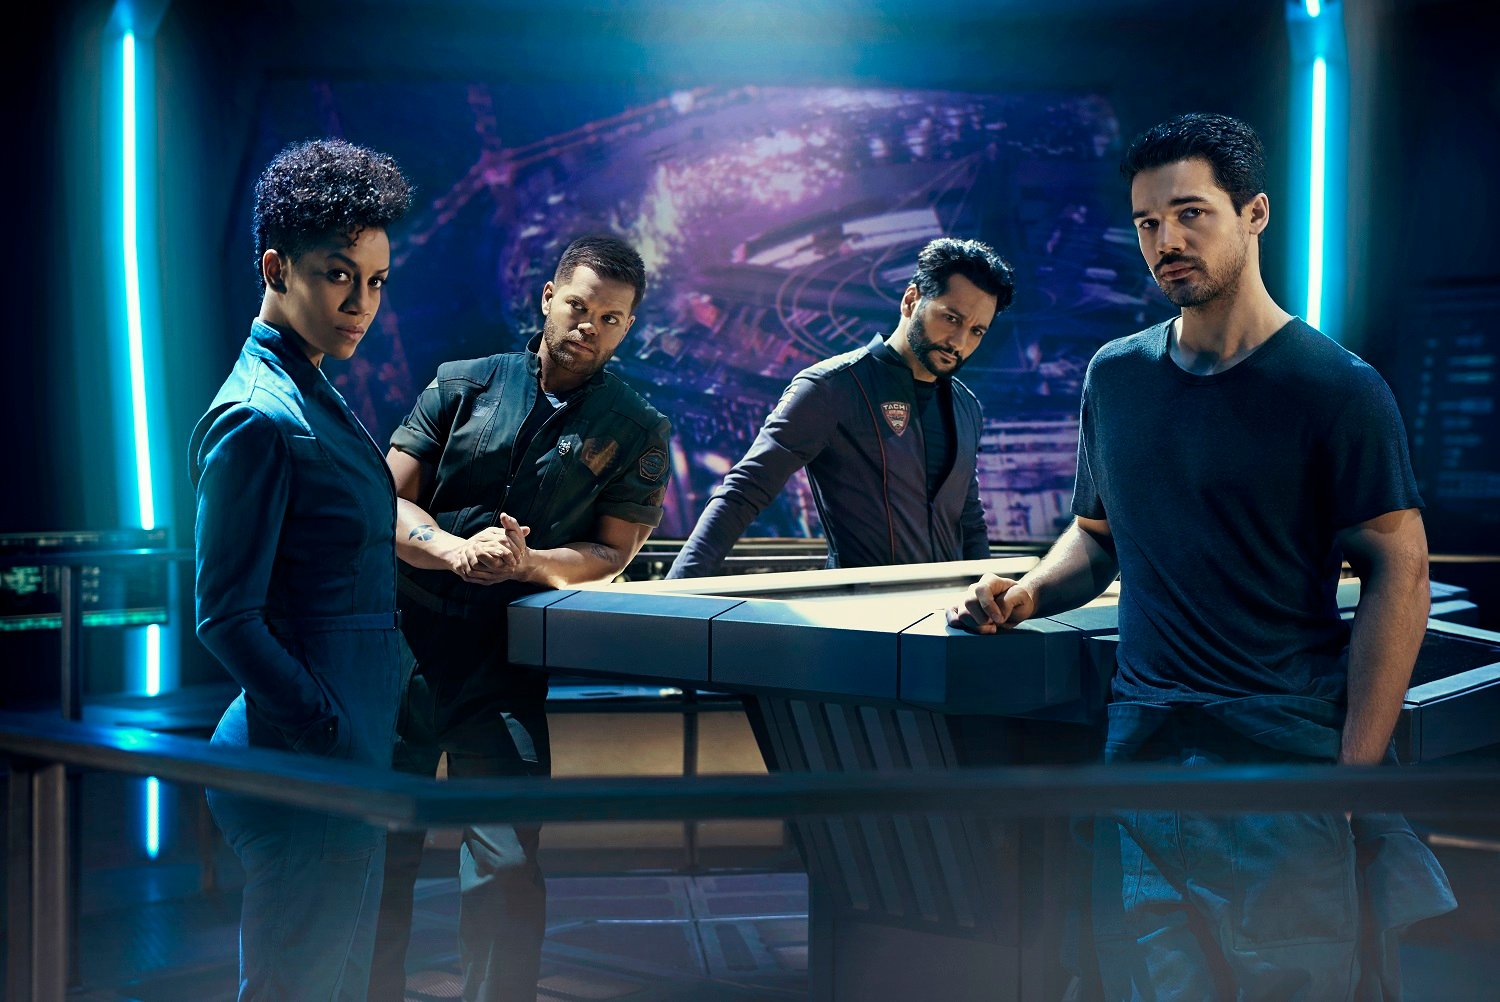 Dominique Tipper as Naomi Nagata, Wes Chatham as Amos Burton, Cas Anvar as Alex Kamal, and Steven Strait as James Holden of The Expanse